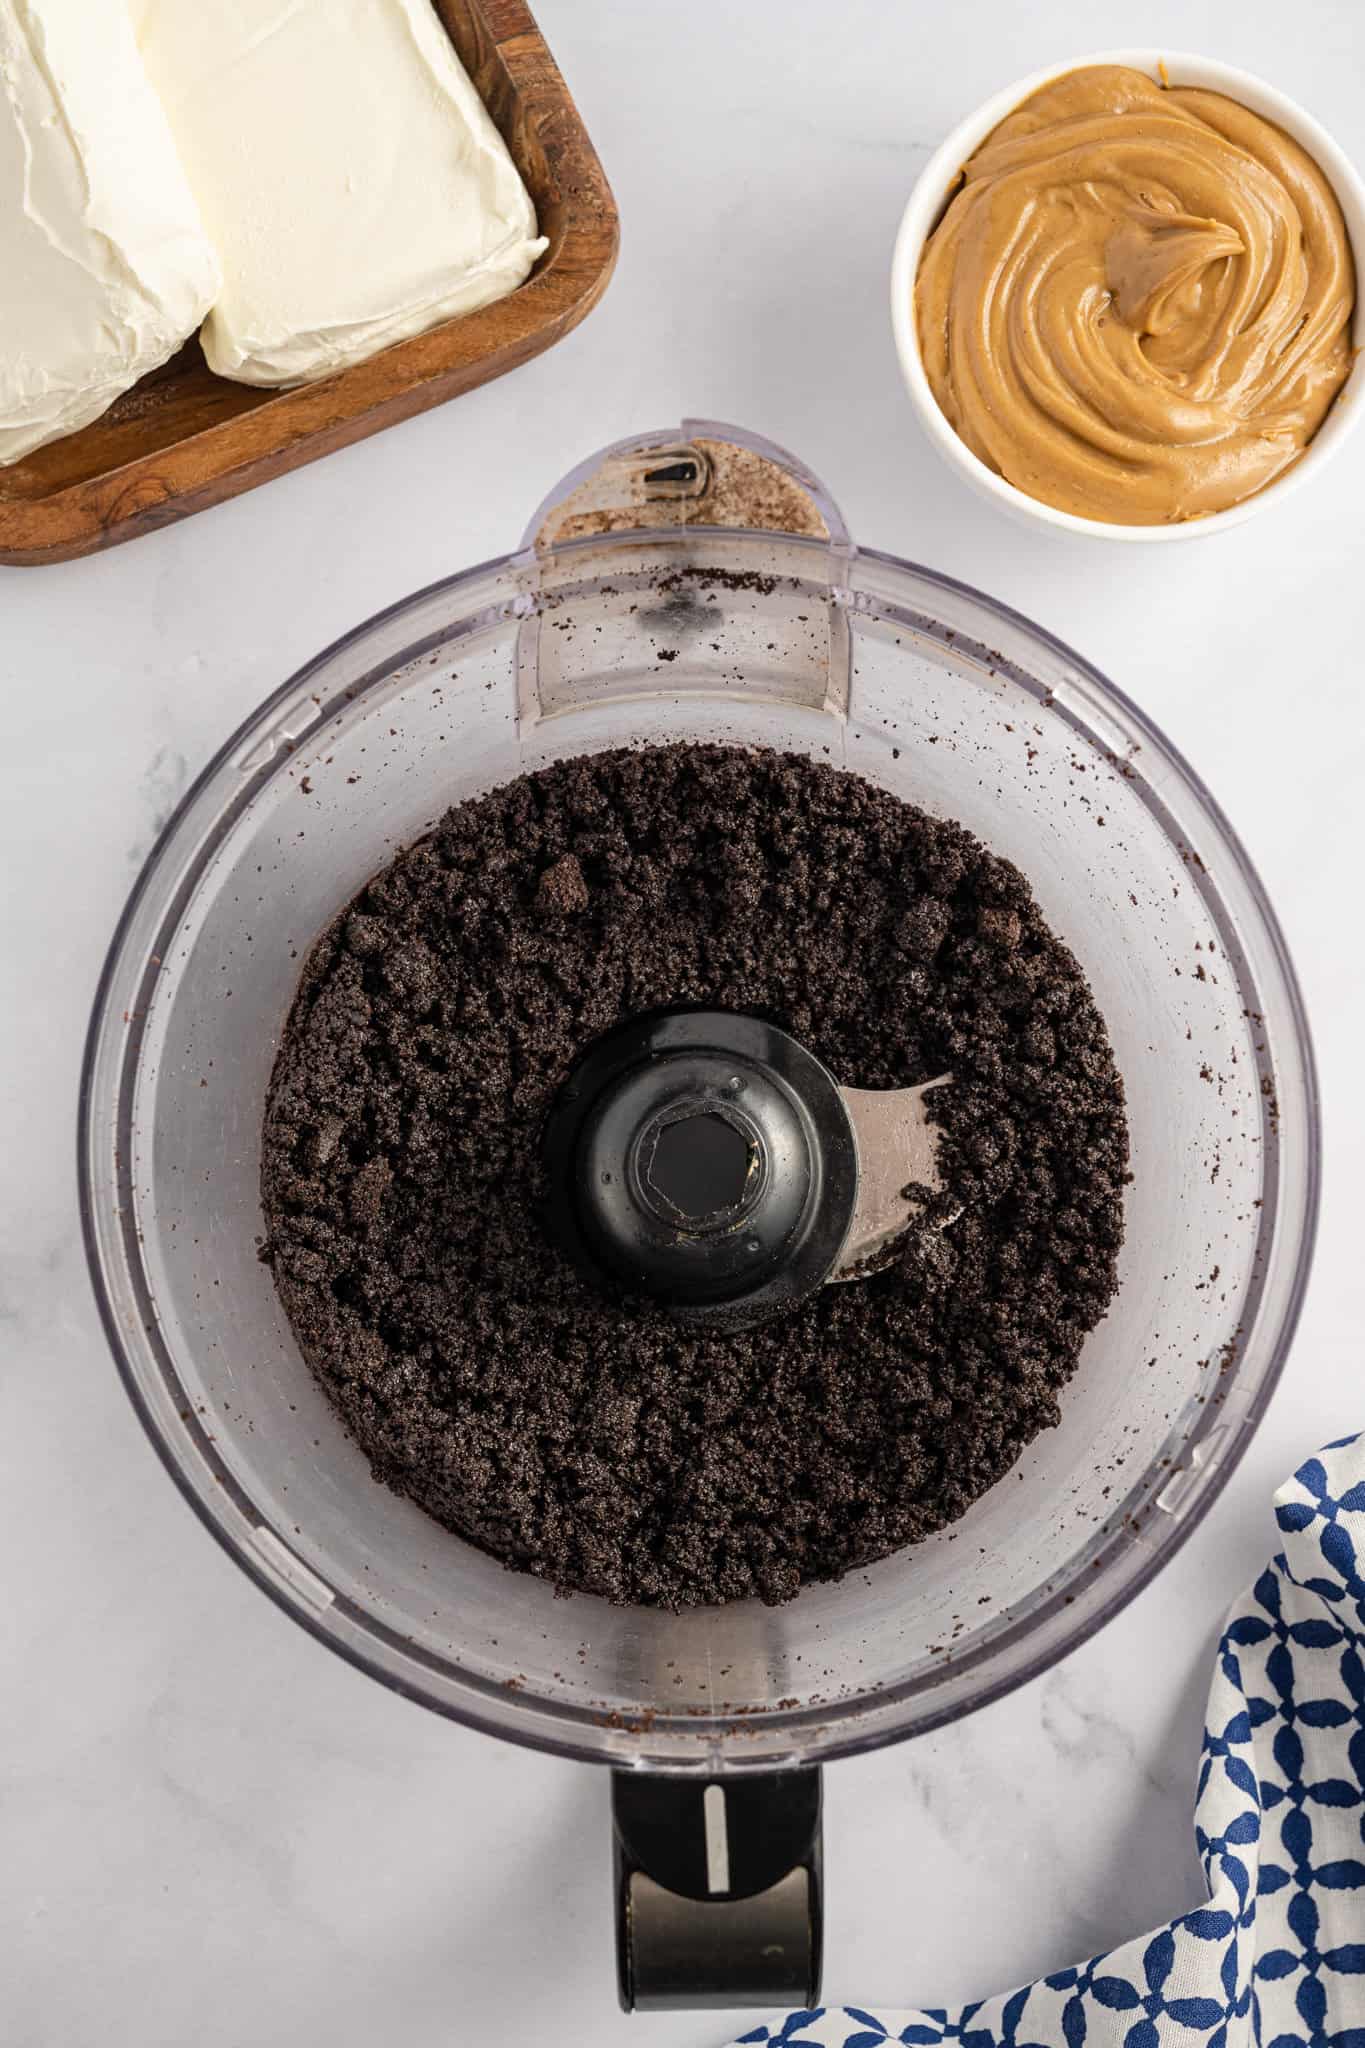 Oreo cookie crumbs in a food processor